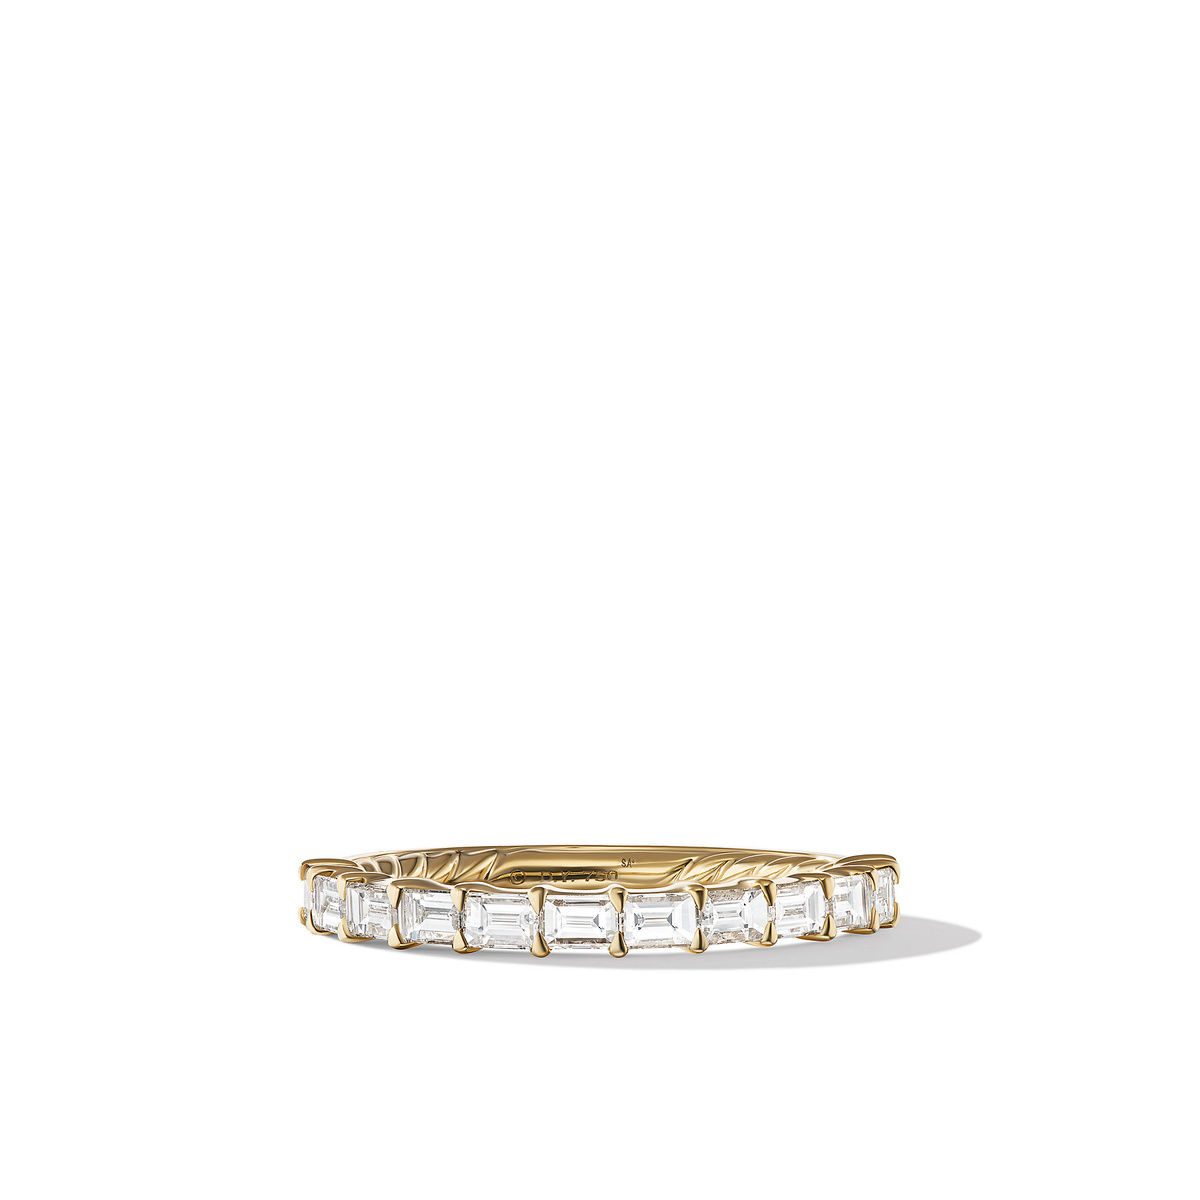 David Yurman DY Eden Partway Band Ring in 18K Yellow Gold with Baguette Diamonds, 2mm - Size 7